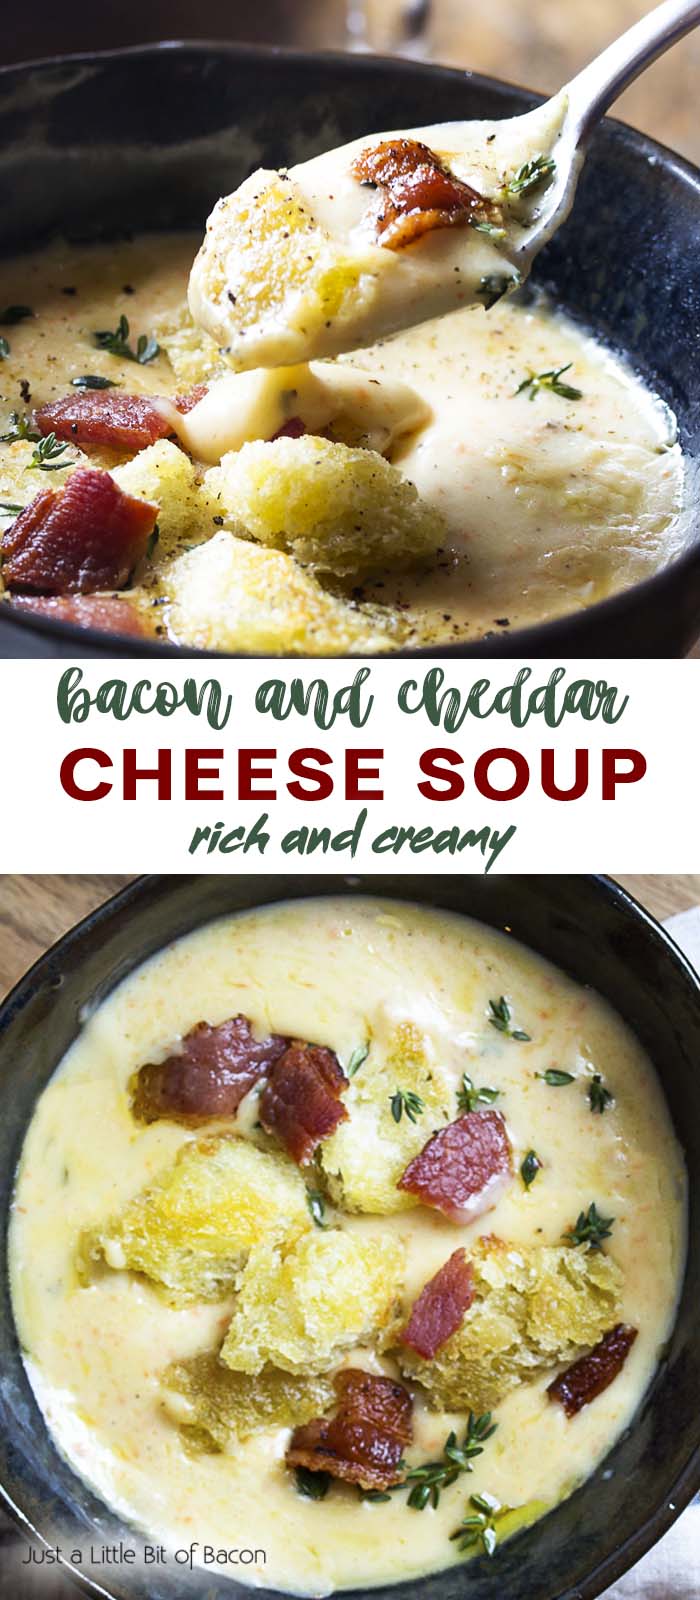 Two views of soup in a bowl and spoon with text overlay - Bacon and Cheddar Cheese Soup.